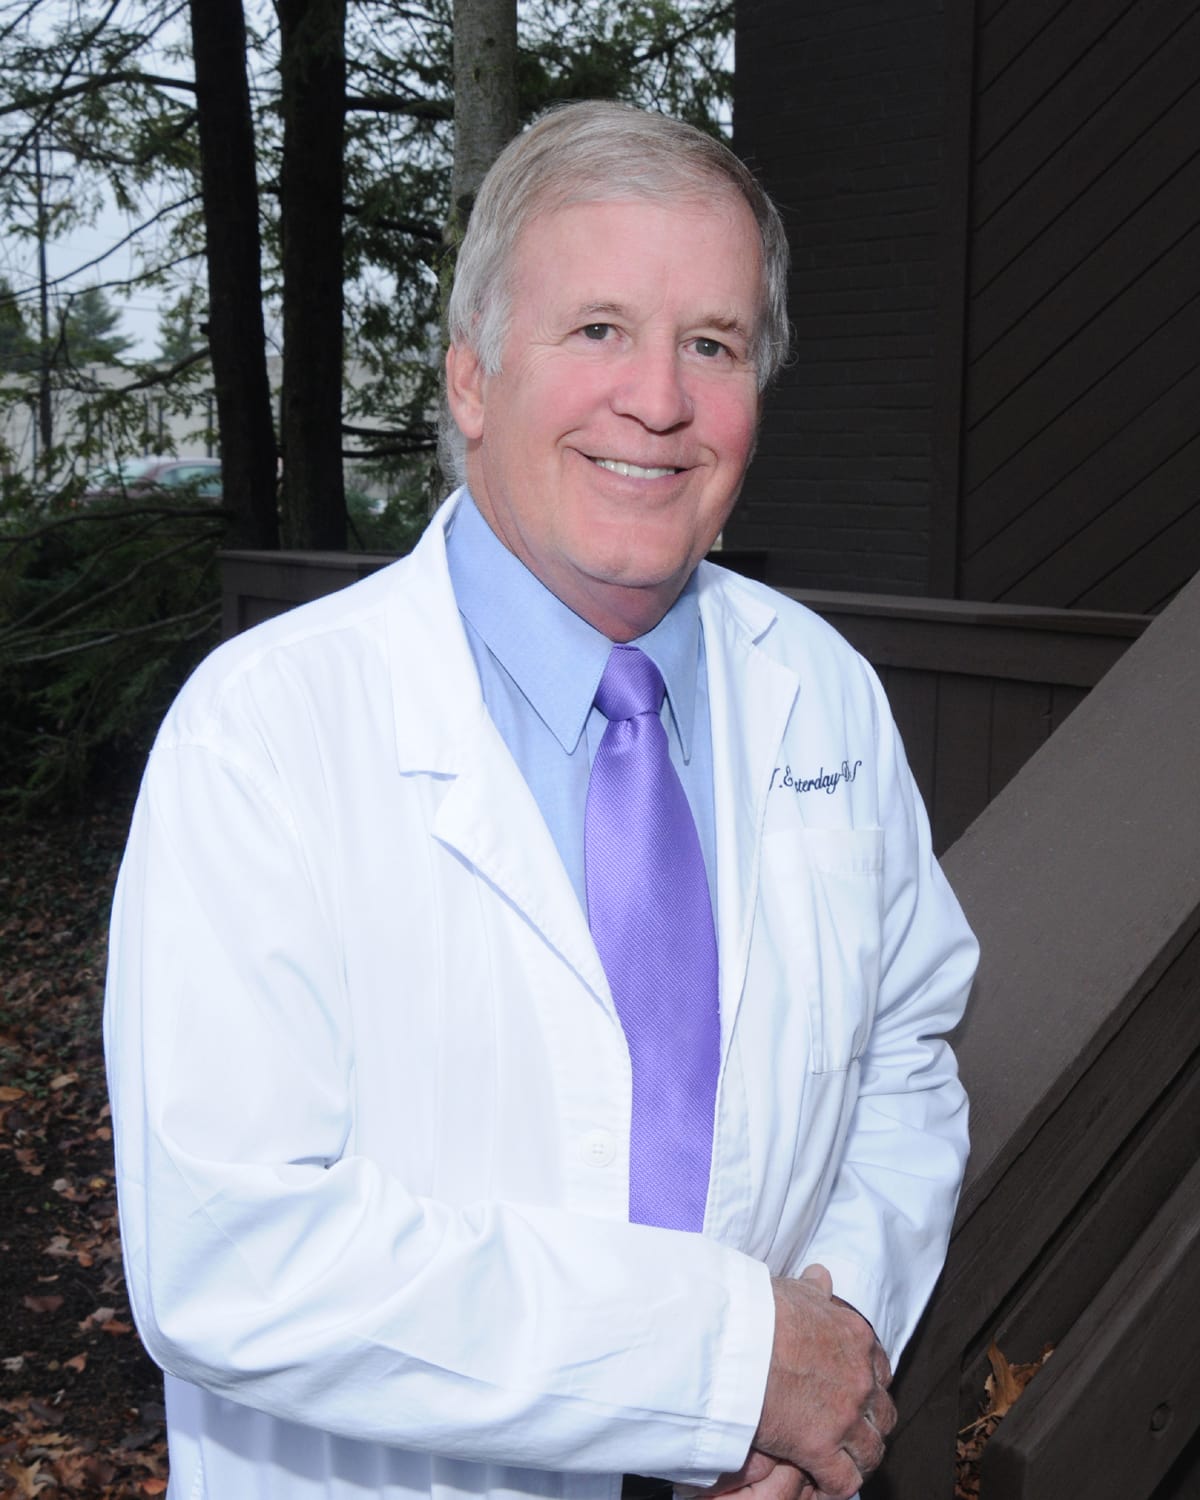 Dr. Bryan T Osterday, DDS